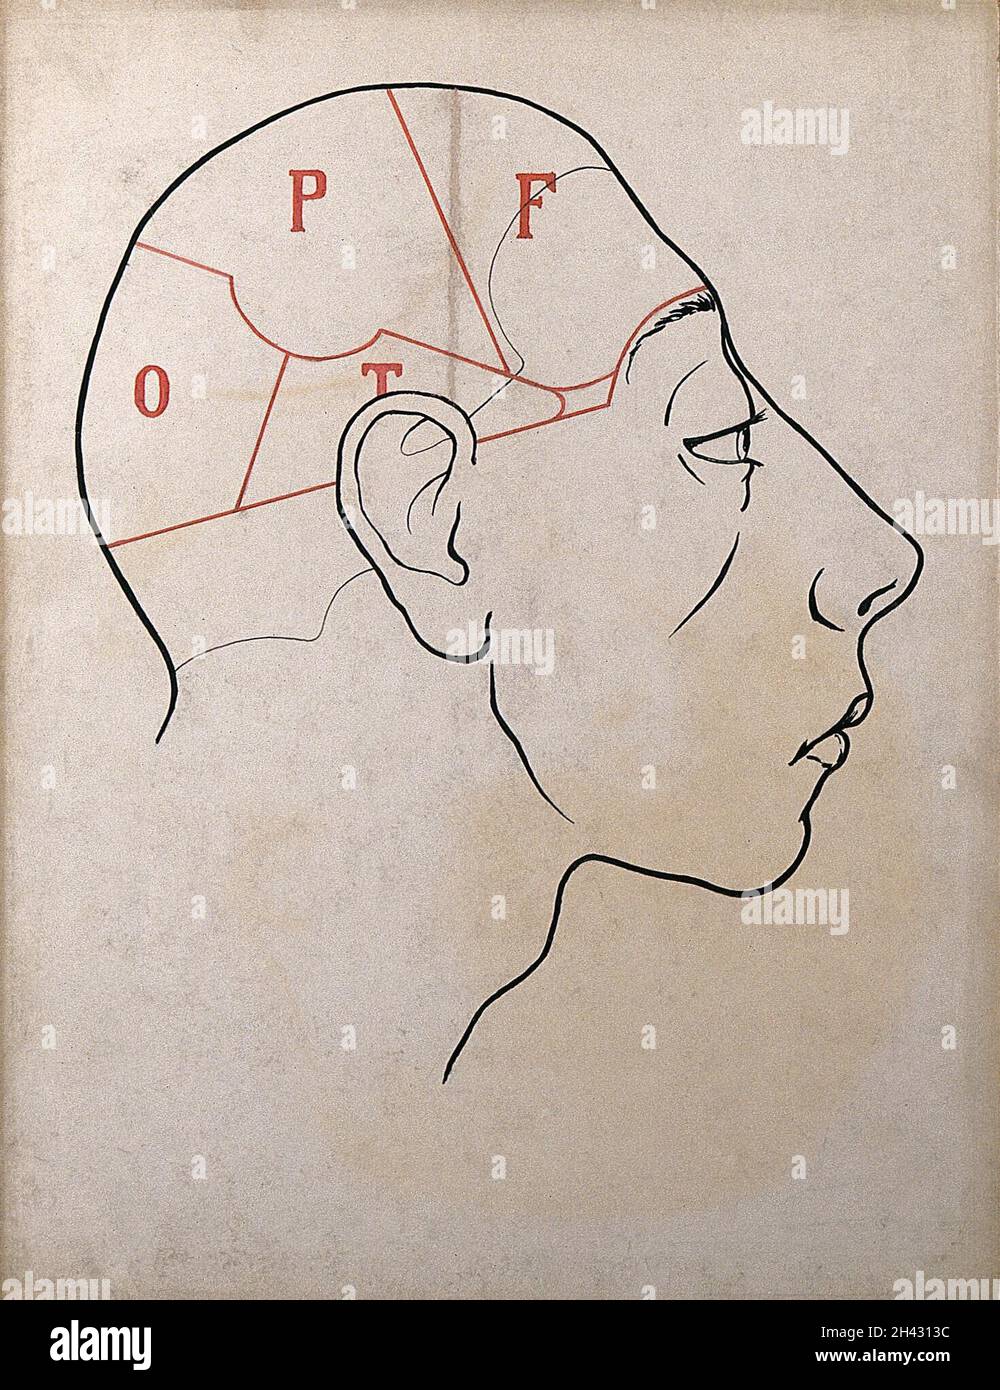 Right profile of head with depressed frontal lobes, divided up to show the location of all the lobes. Drawing, c. 1900. Stock Photo